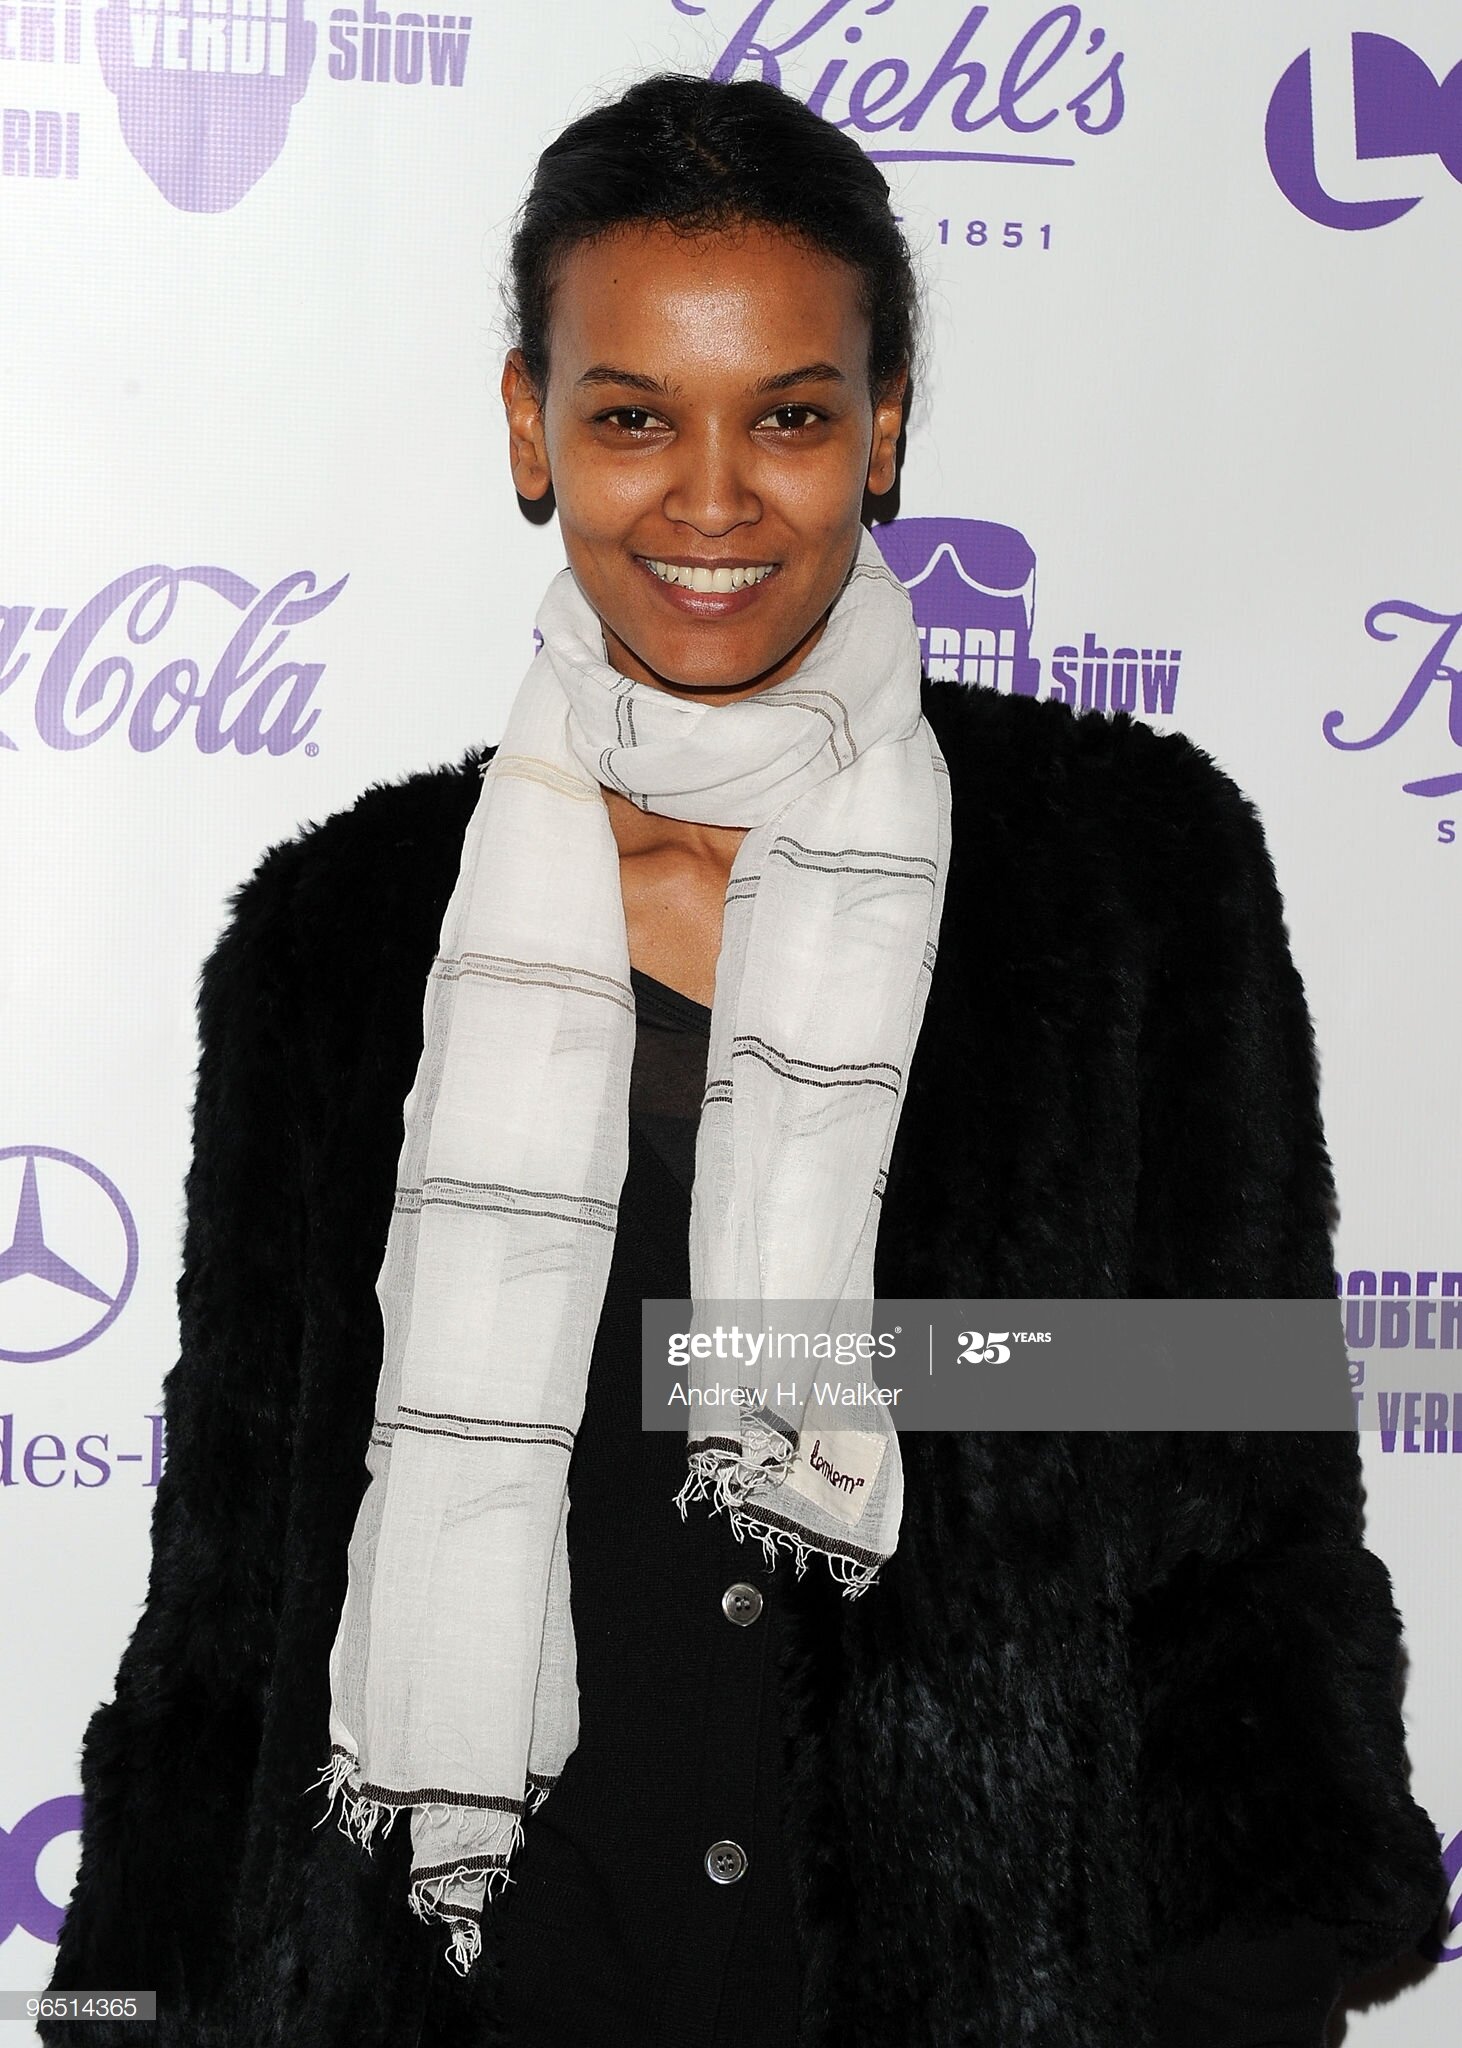  NEW YORK - FEBRUARY 08:  Liya Kebede attends the premiere screening of "The Robert Verdi Show Starring Robert Verdi" at the SVA Theater on February 8, 2010 in New York City.  (Photo by Andrew H. Walker/Getty Images) 